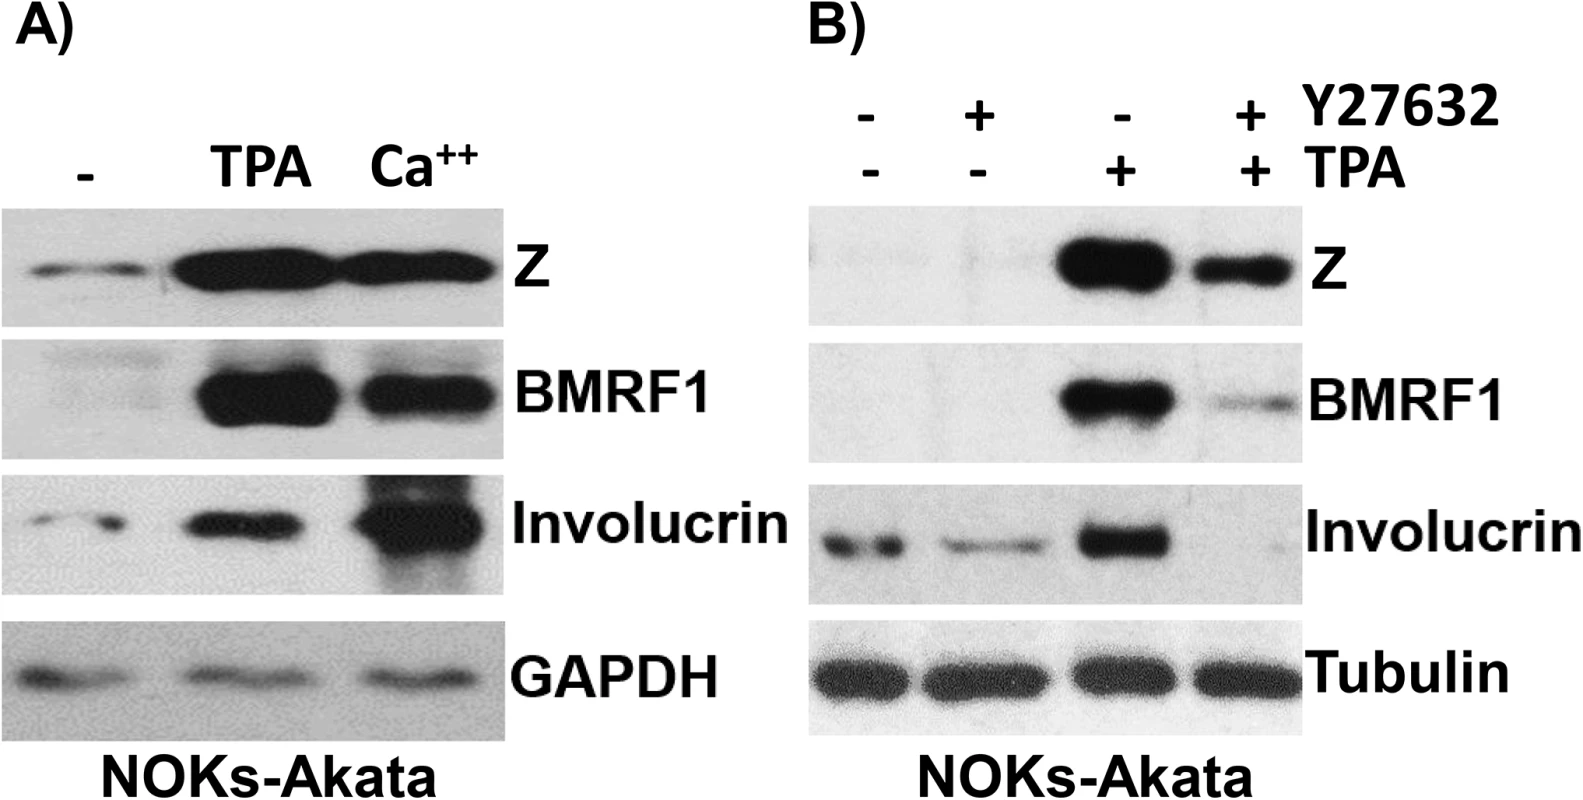 Treatment of NOKs-Akata cells with the differentiating agents, TPA and calcium chloride/serum, results in lytic EBV reactivation.